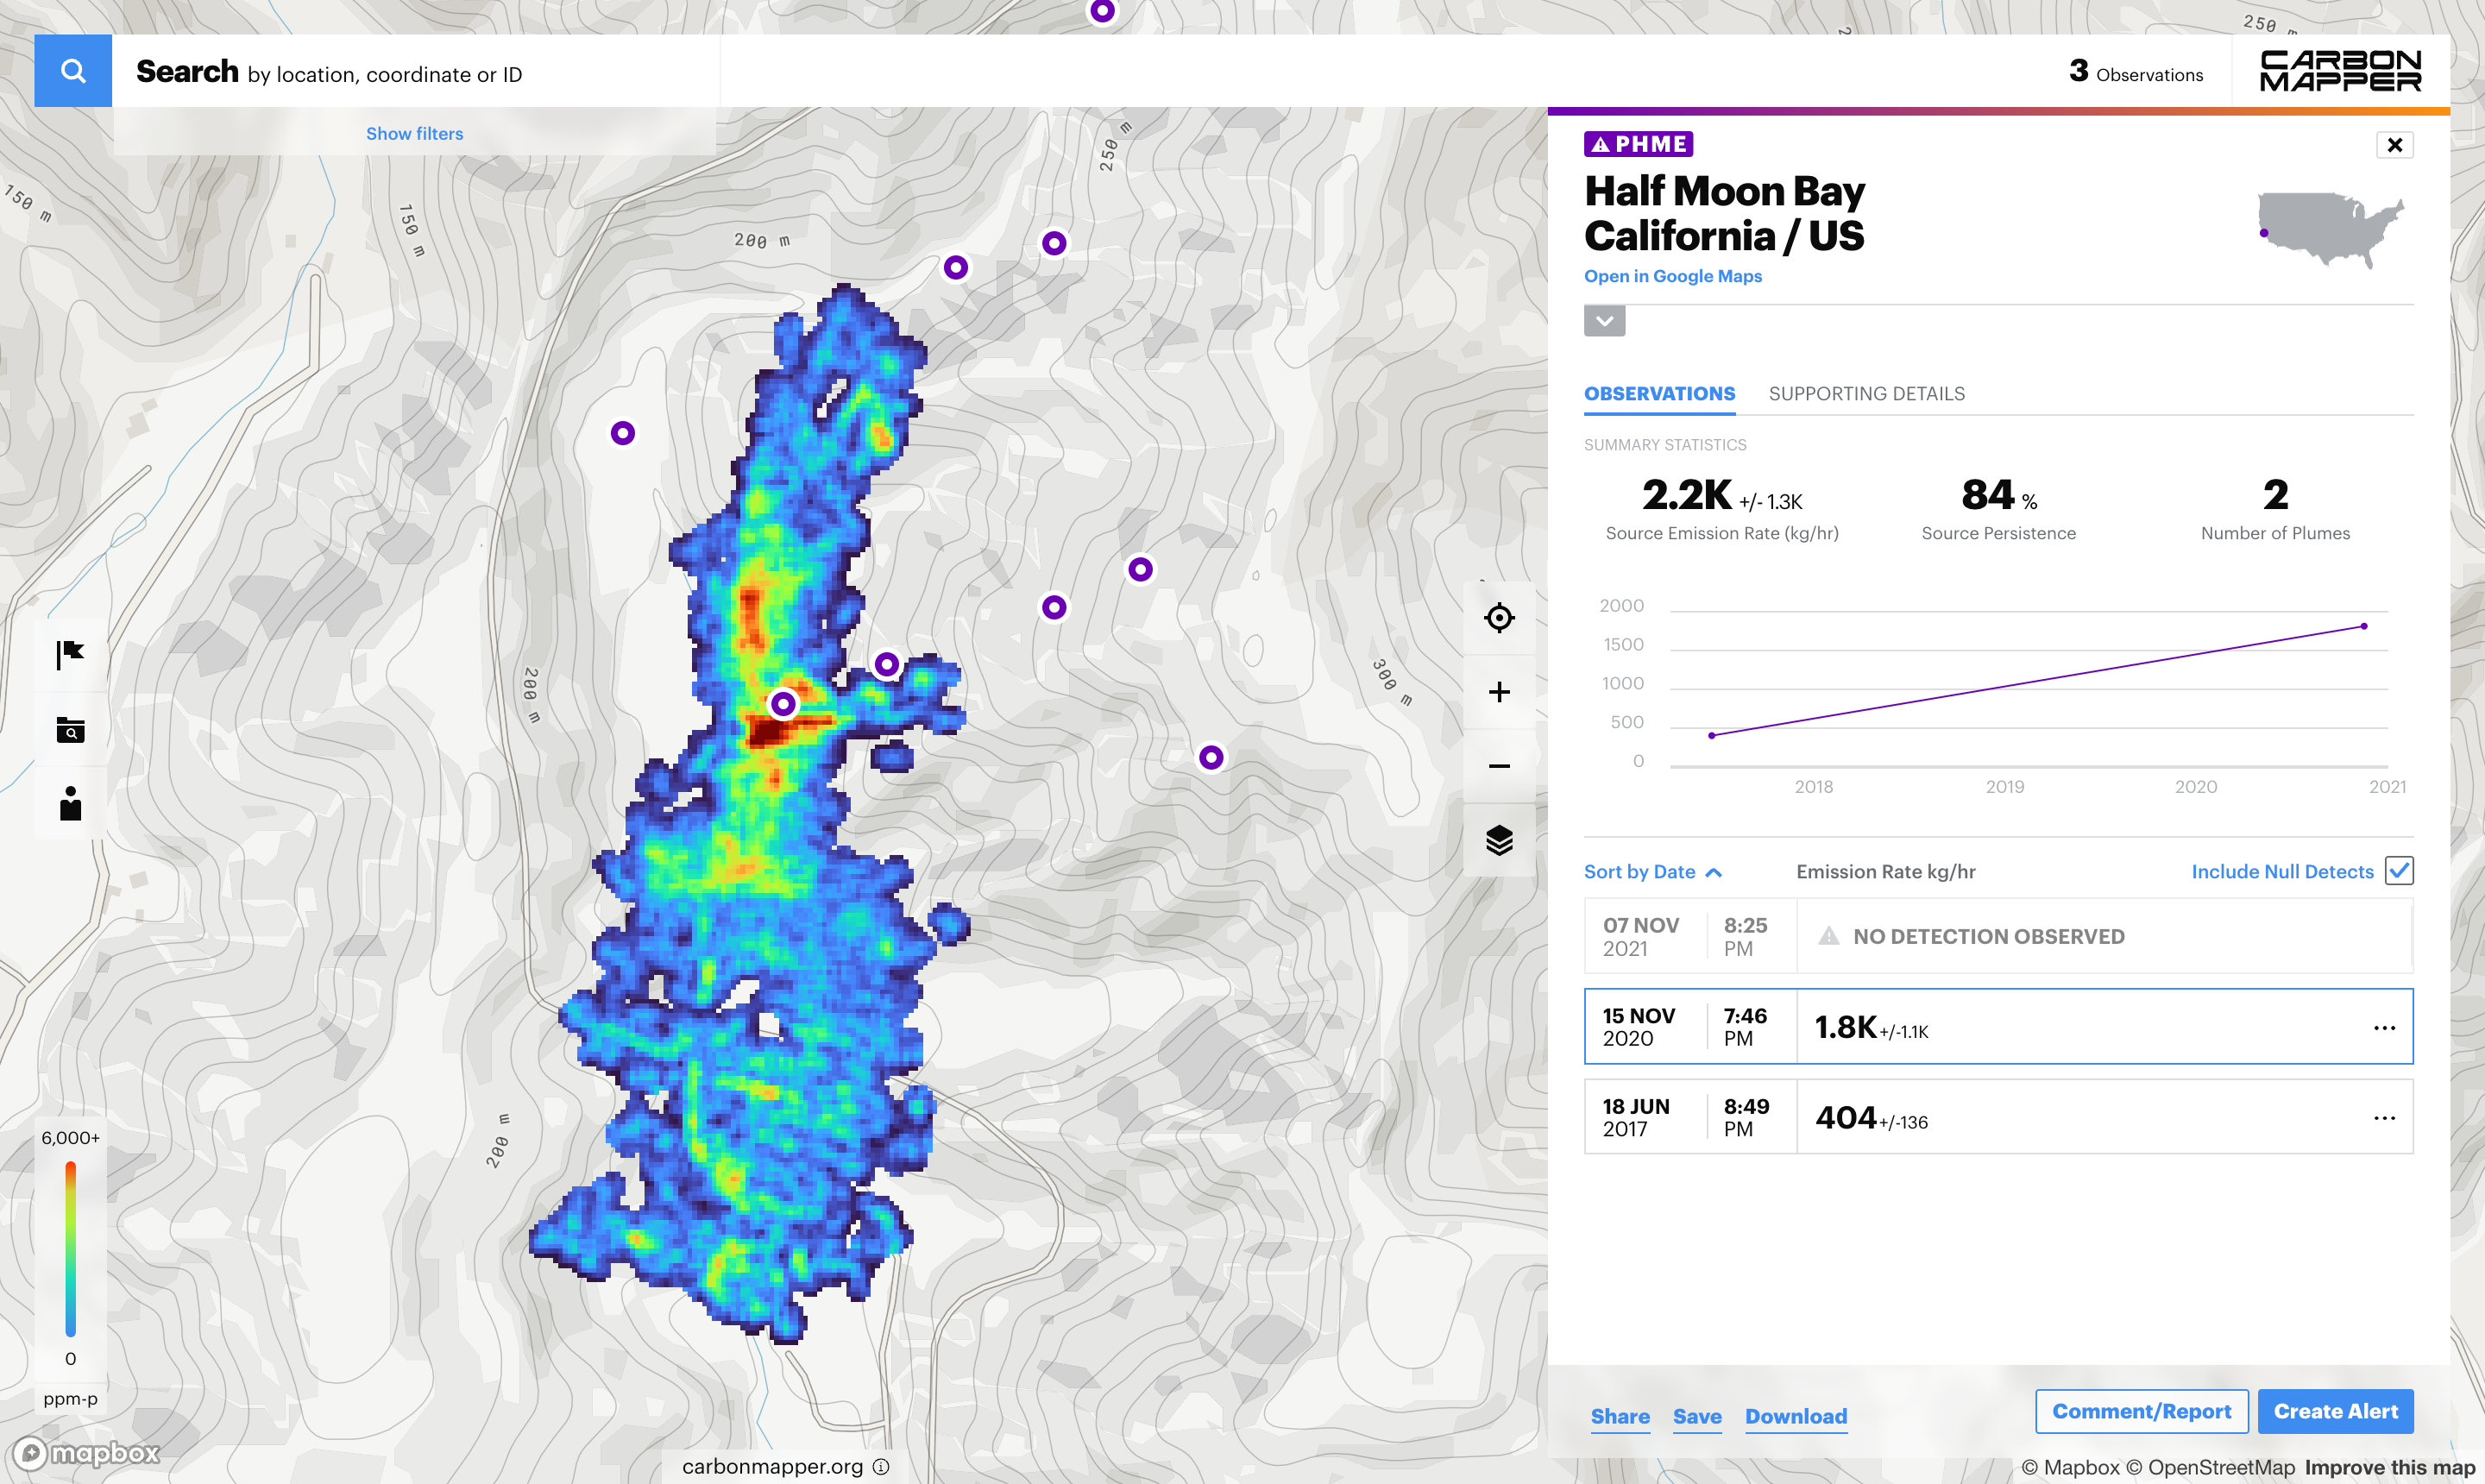 Image of the Carbon Mapper data portal showing a methane plume